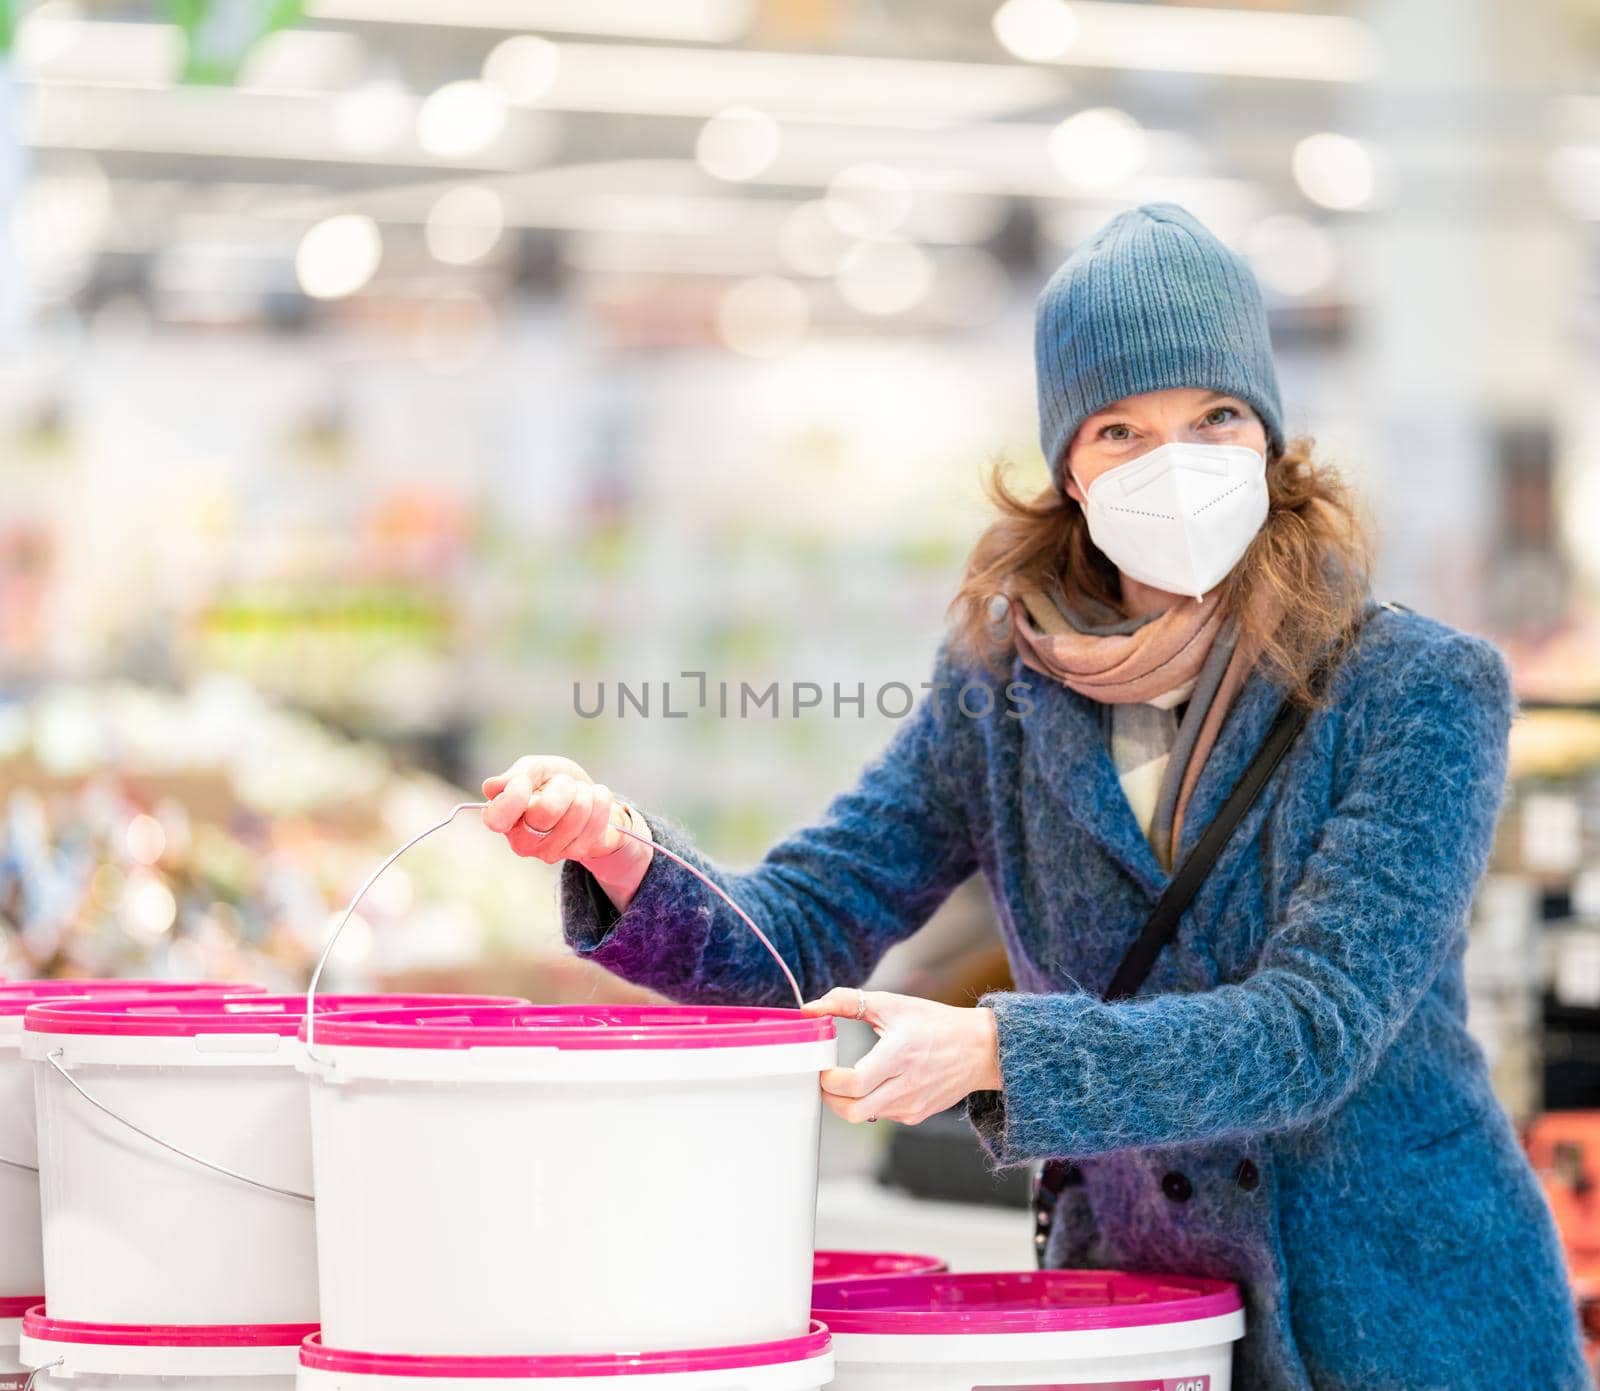 Paint colors in the store. young woman shopping by Edophoto